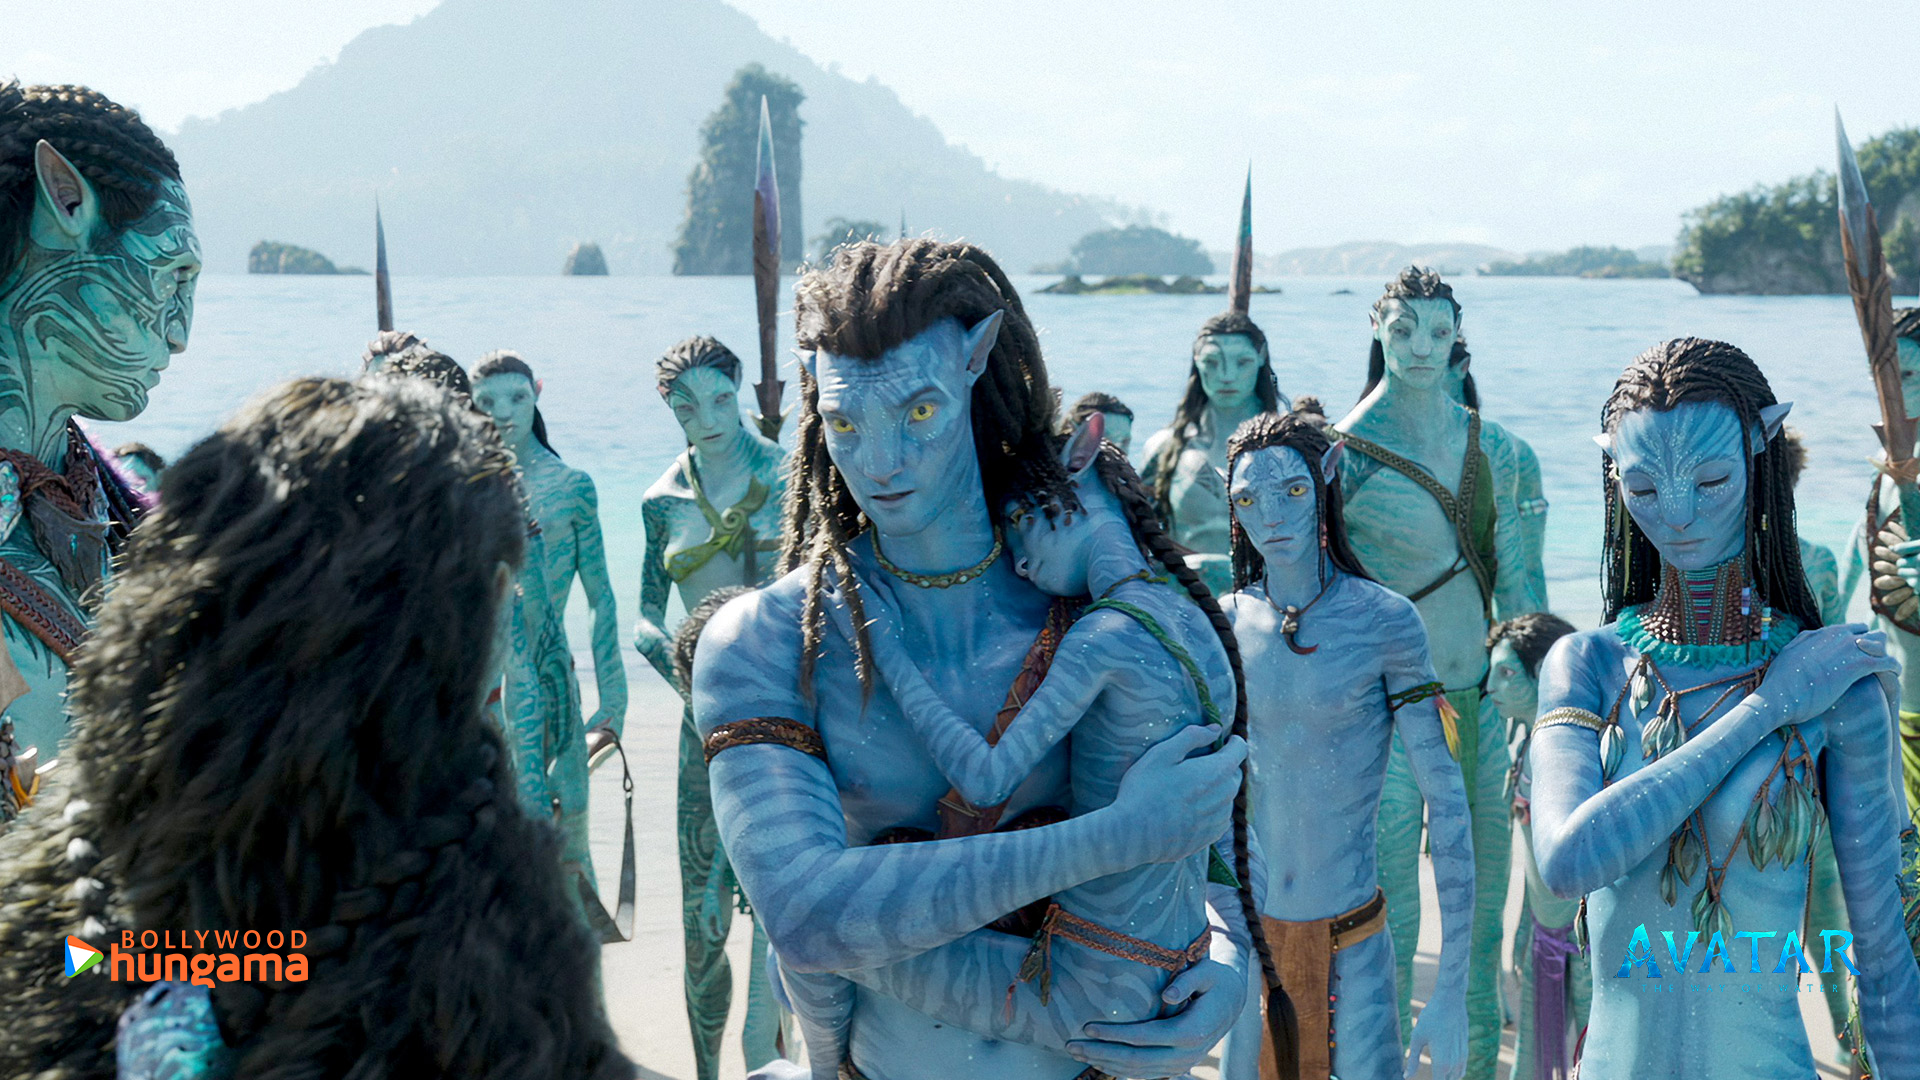 Avatar: The Way of Water (English) 2022 Wallpapers | Avatar: The Way of  Water (English) 2022 HD Images | Photos avatar-the-way-of-water-english-12-2  - Bollywood Hungama